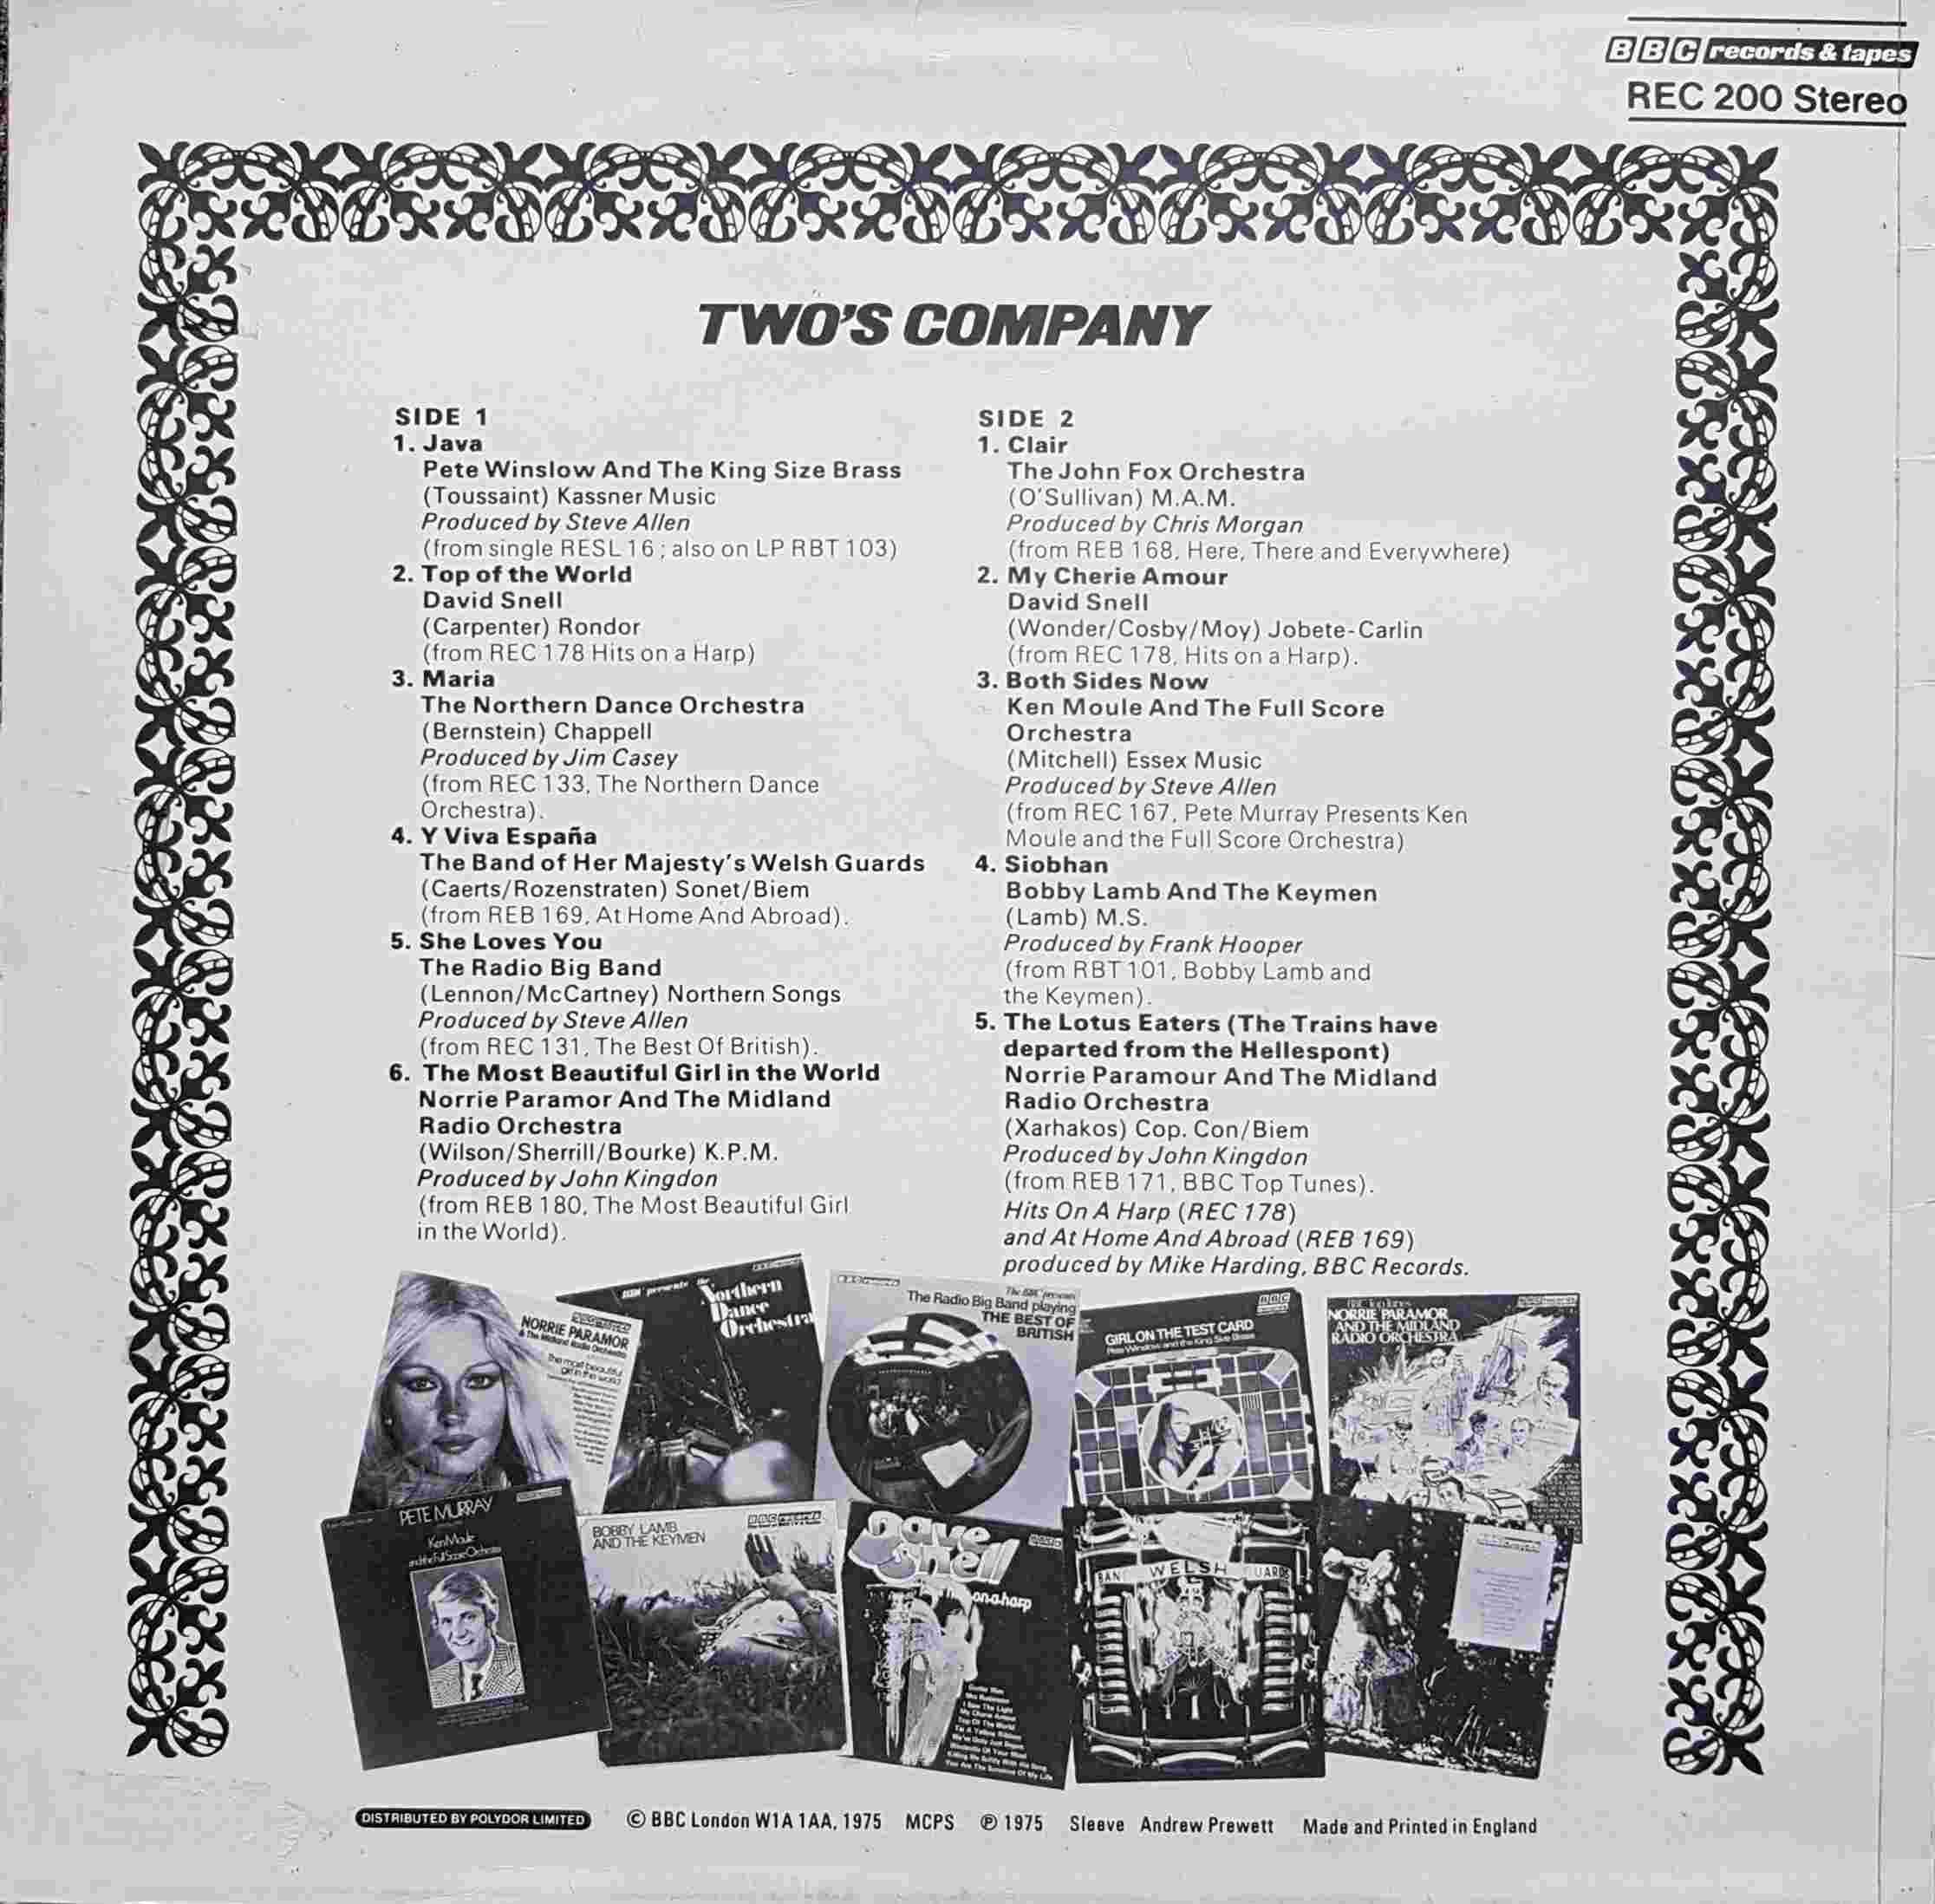 Picture of REC 200 The easy listening sounds of Radio 2 - Volume 1: Two's company by artist Various from the BBC records and Tapes library